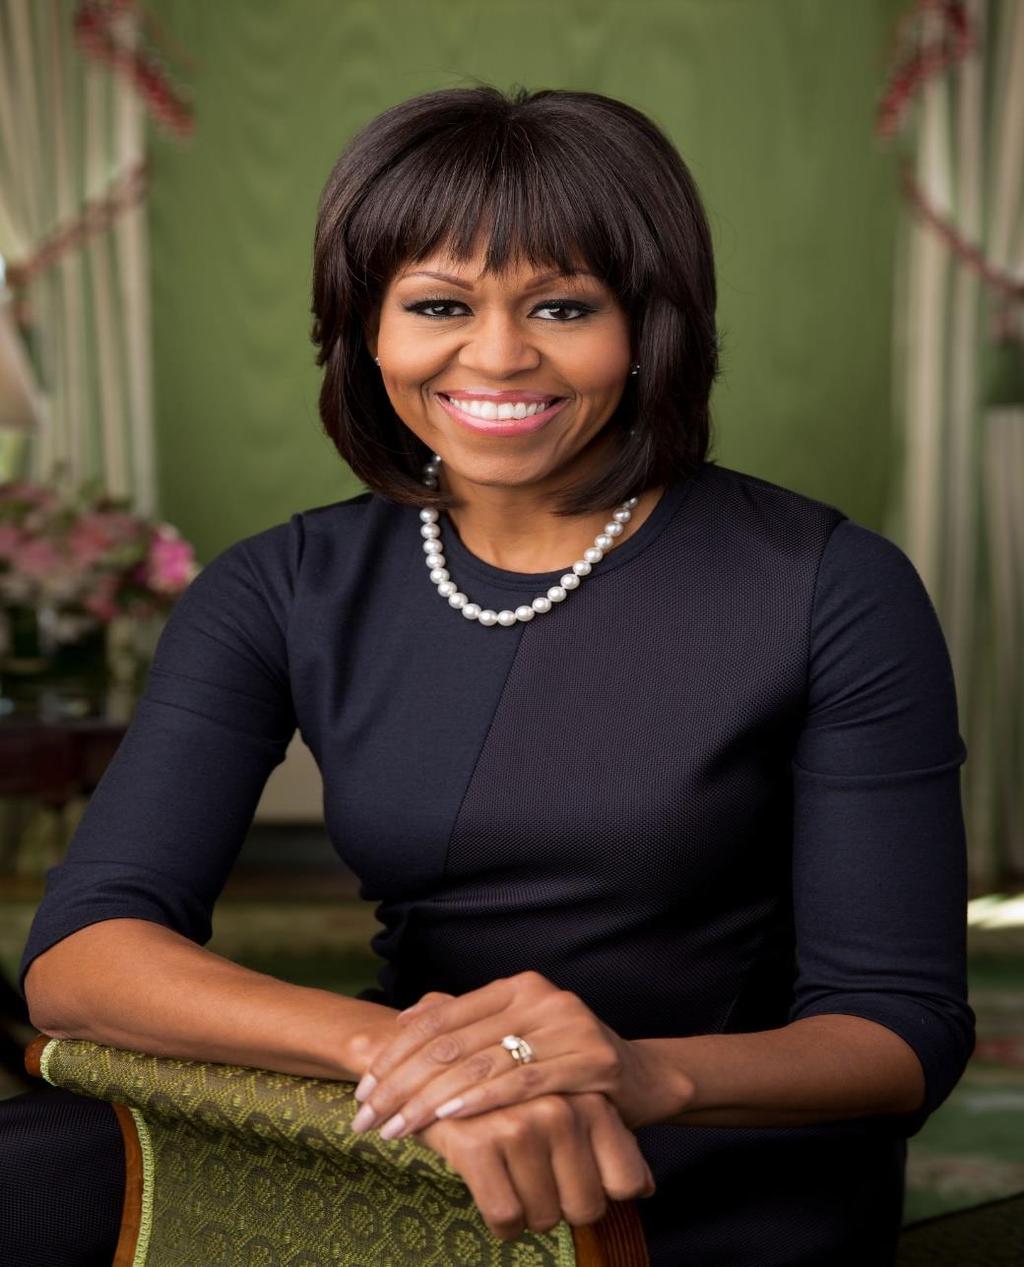 MICHELLE OBAMA Michelle LaVaughn Robinson Obama (born January 17, 1964) is an American lawyer and writer who was First Lady of the United States from 2009 to 2017.